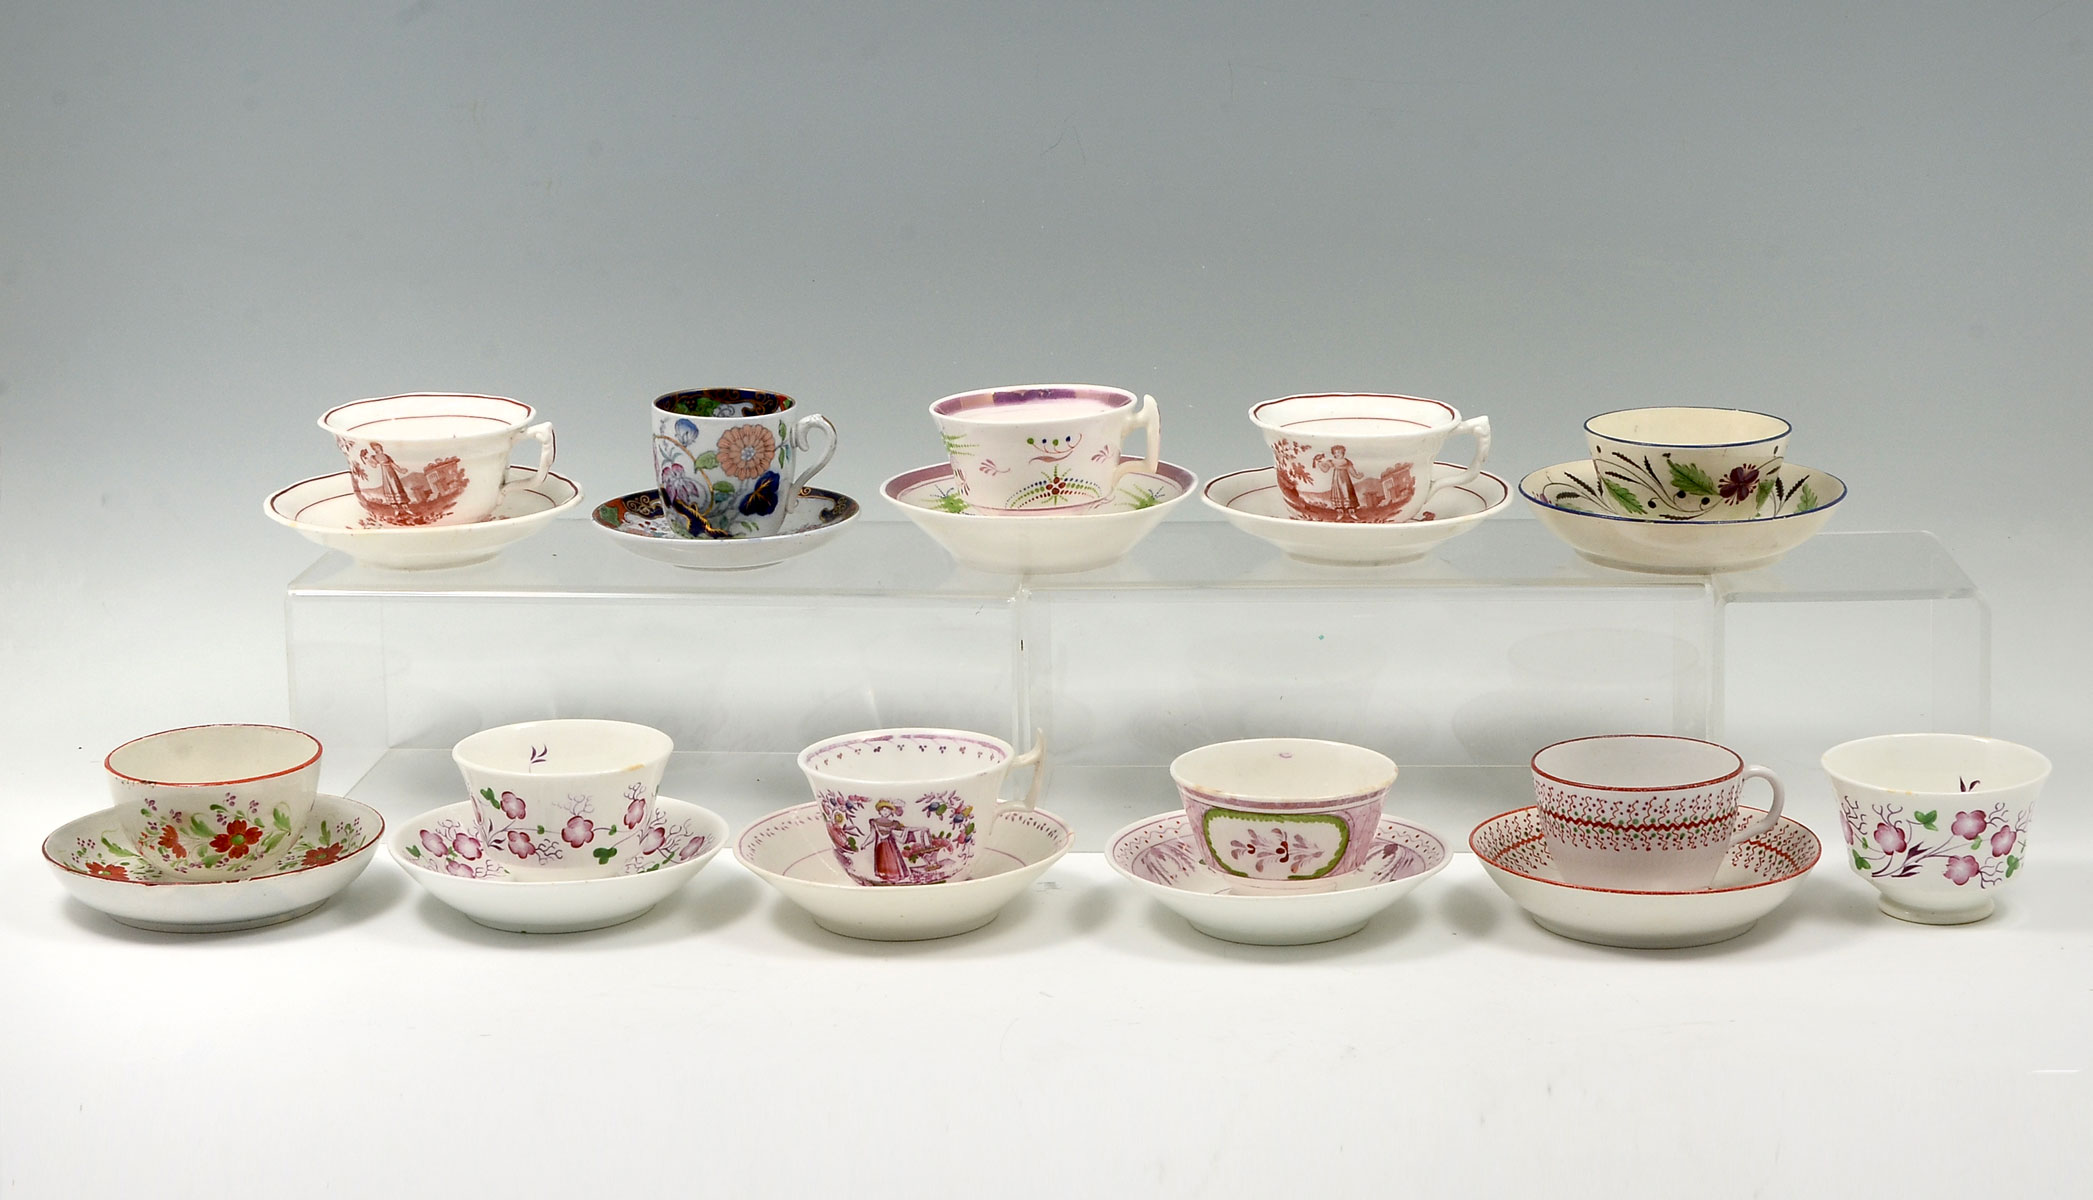 EARLY SOFT PASTE PORCELAIN CUPS